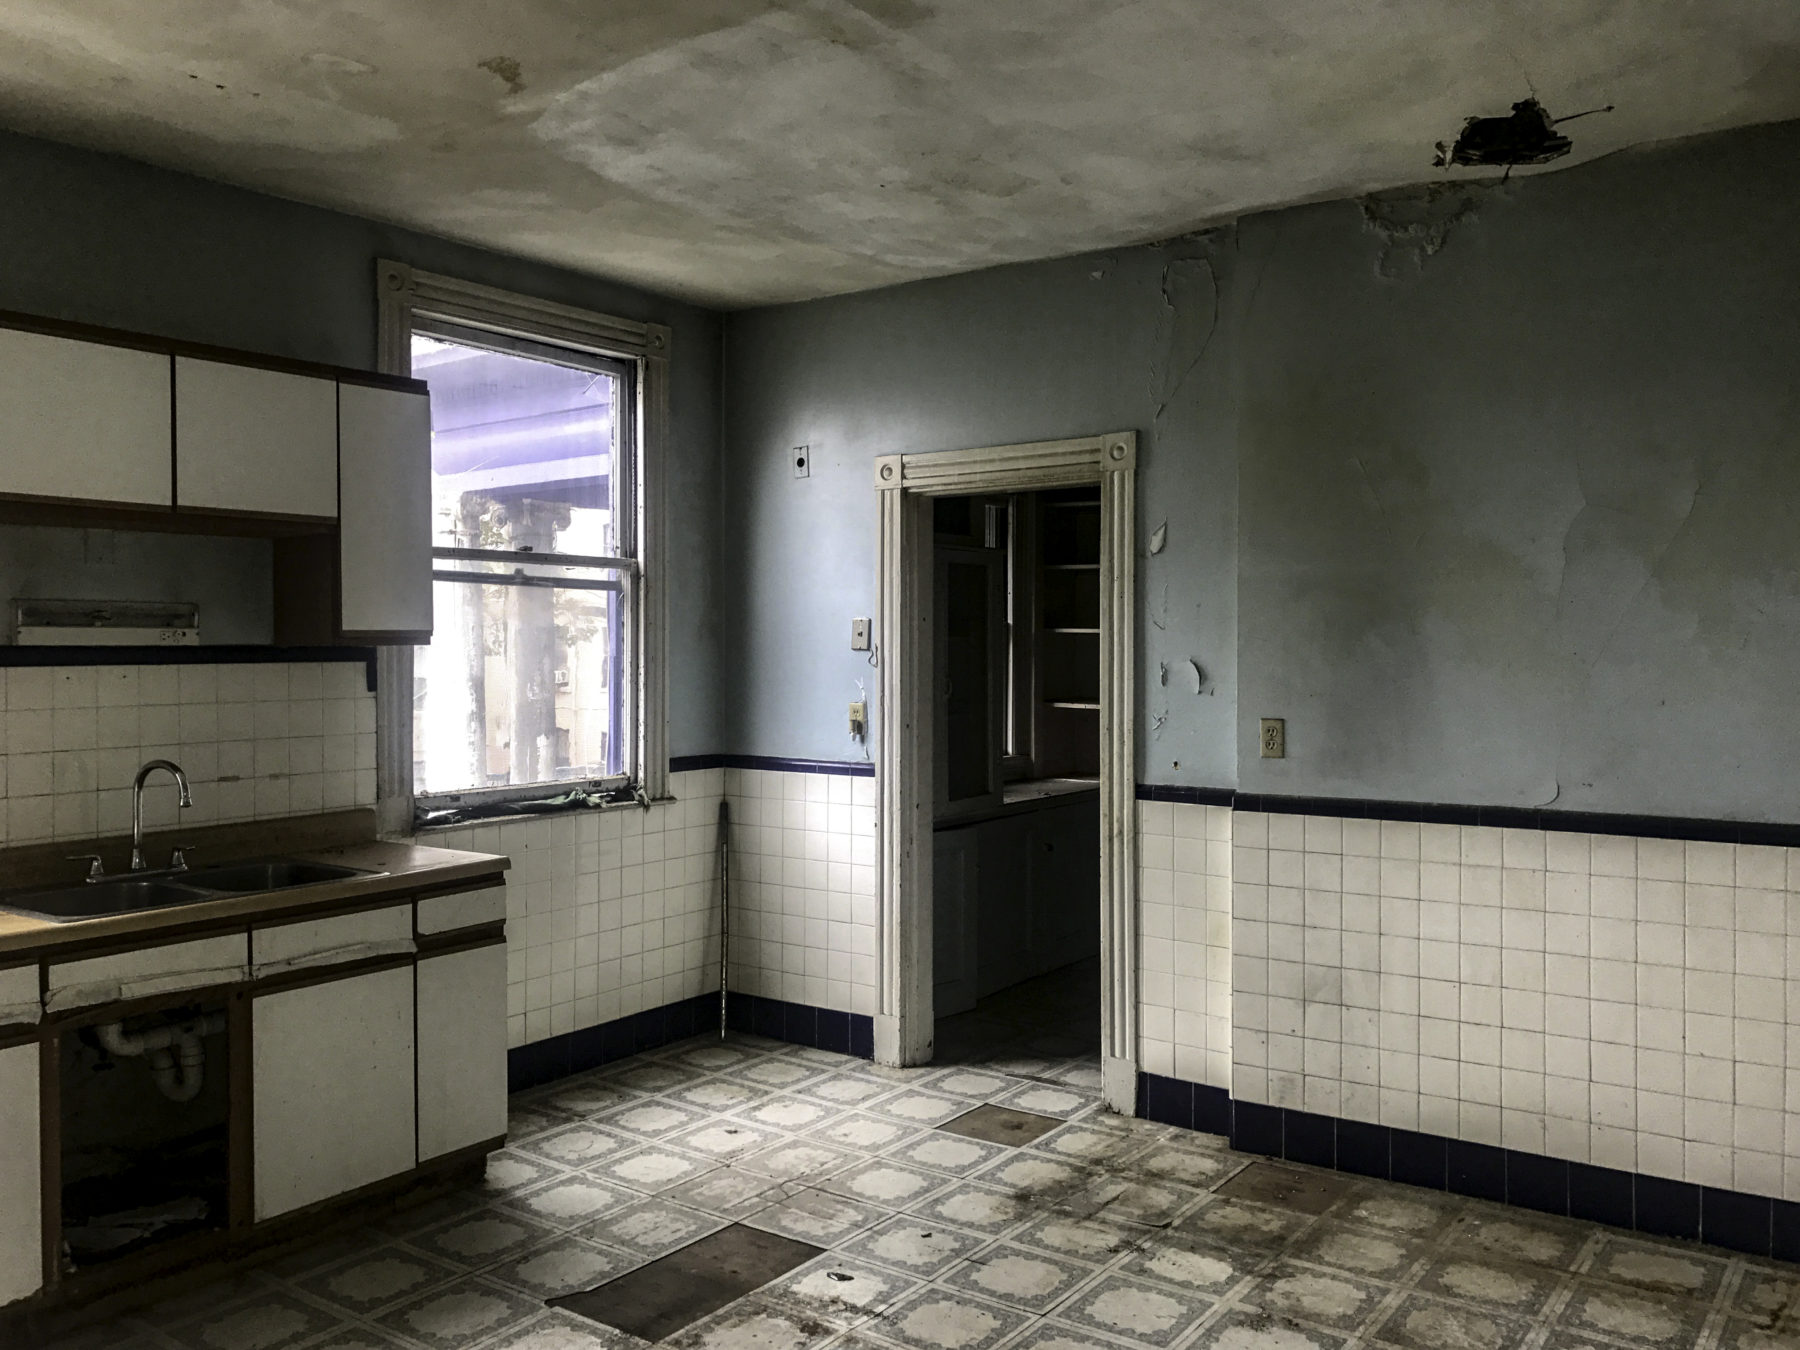 photo of kitchen in poor condition